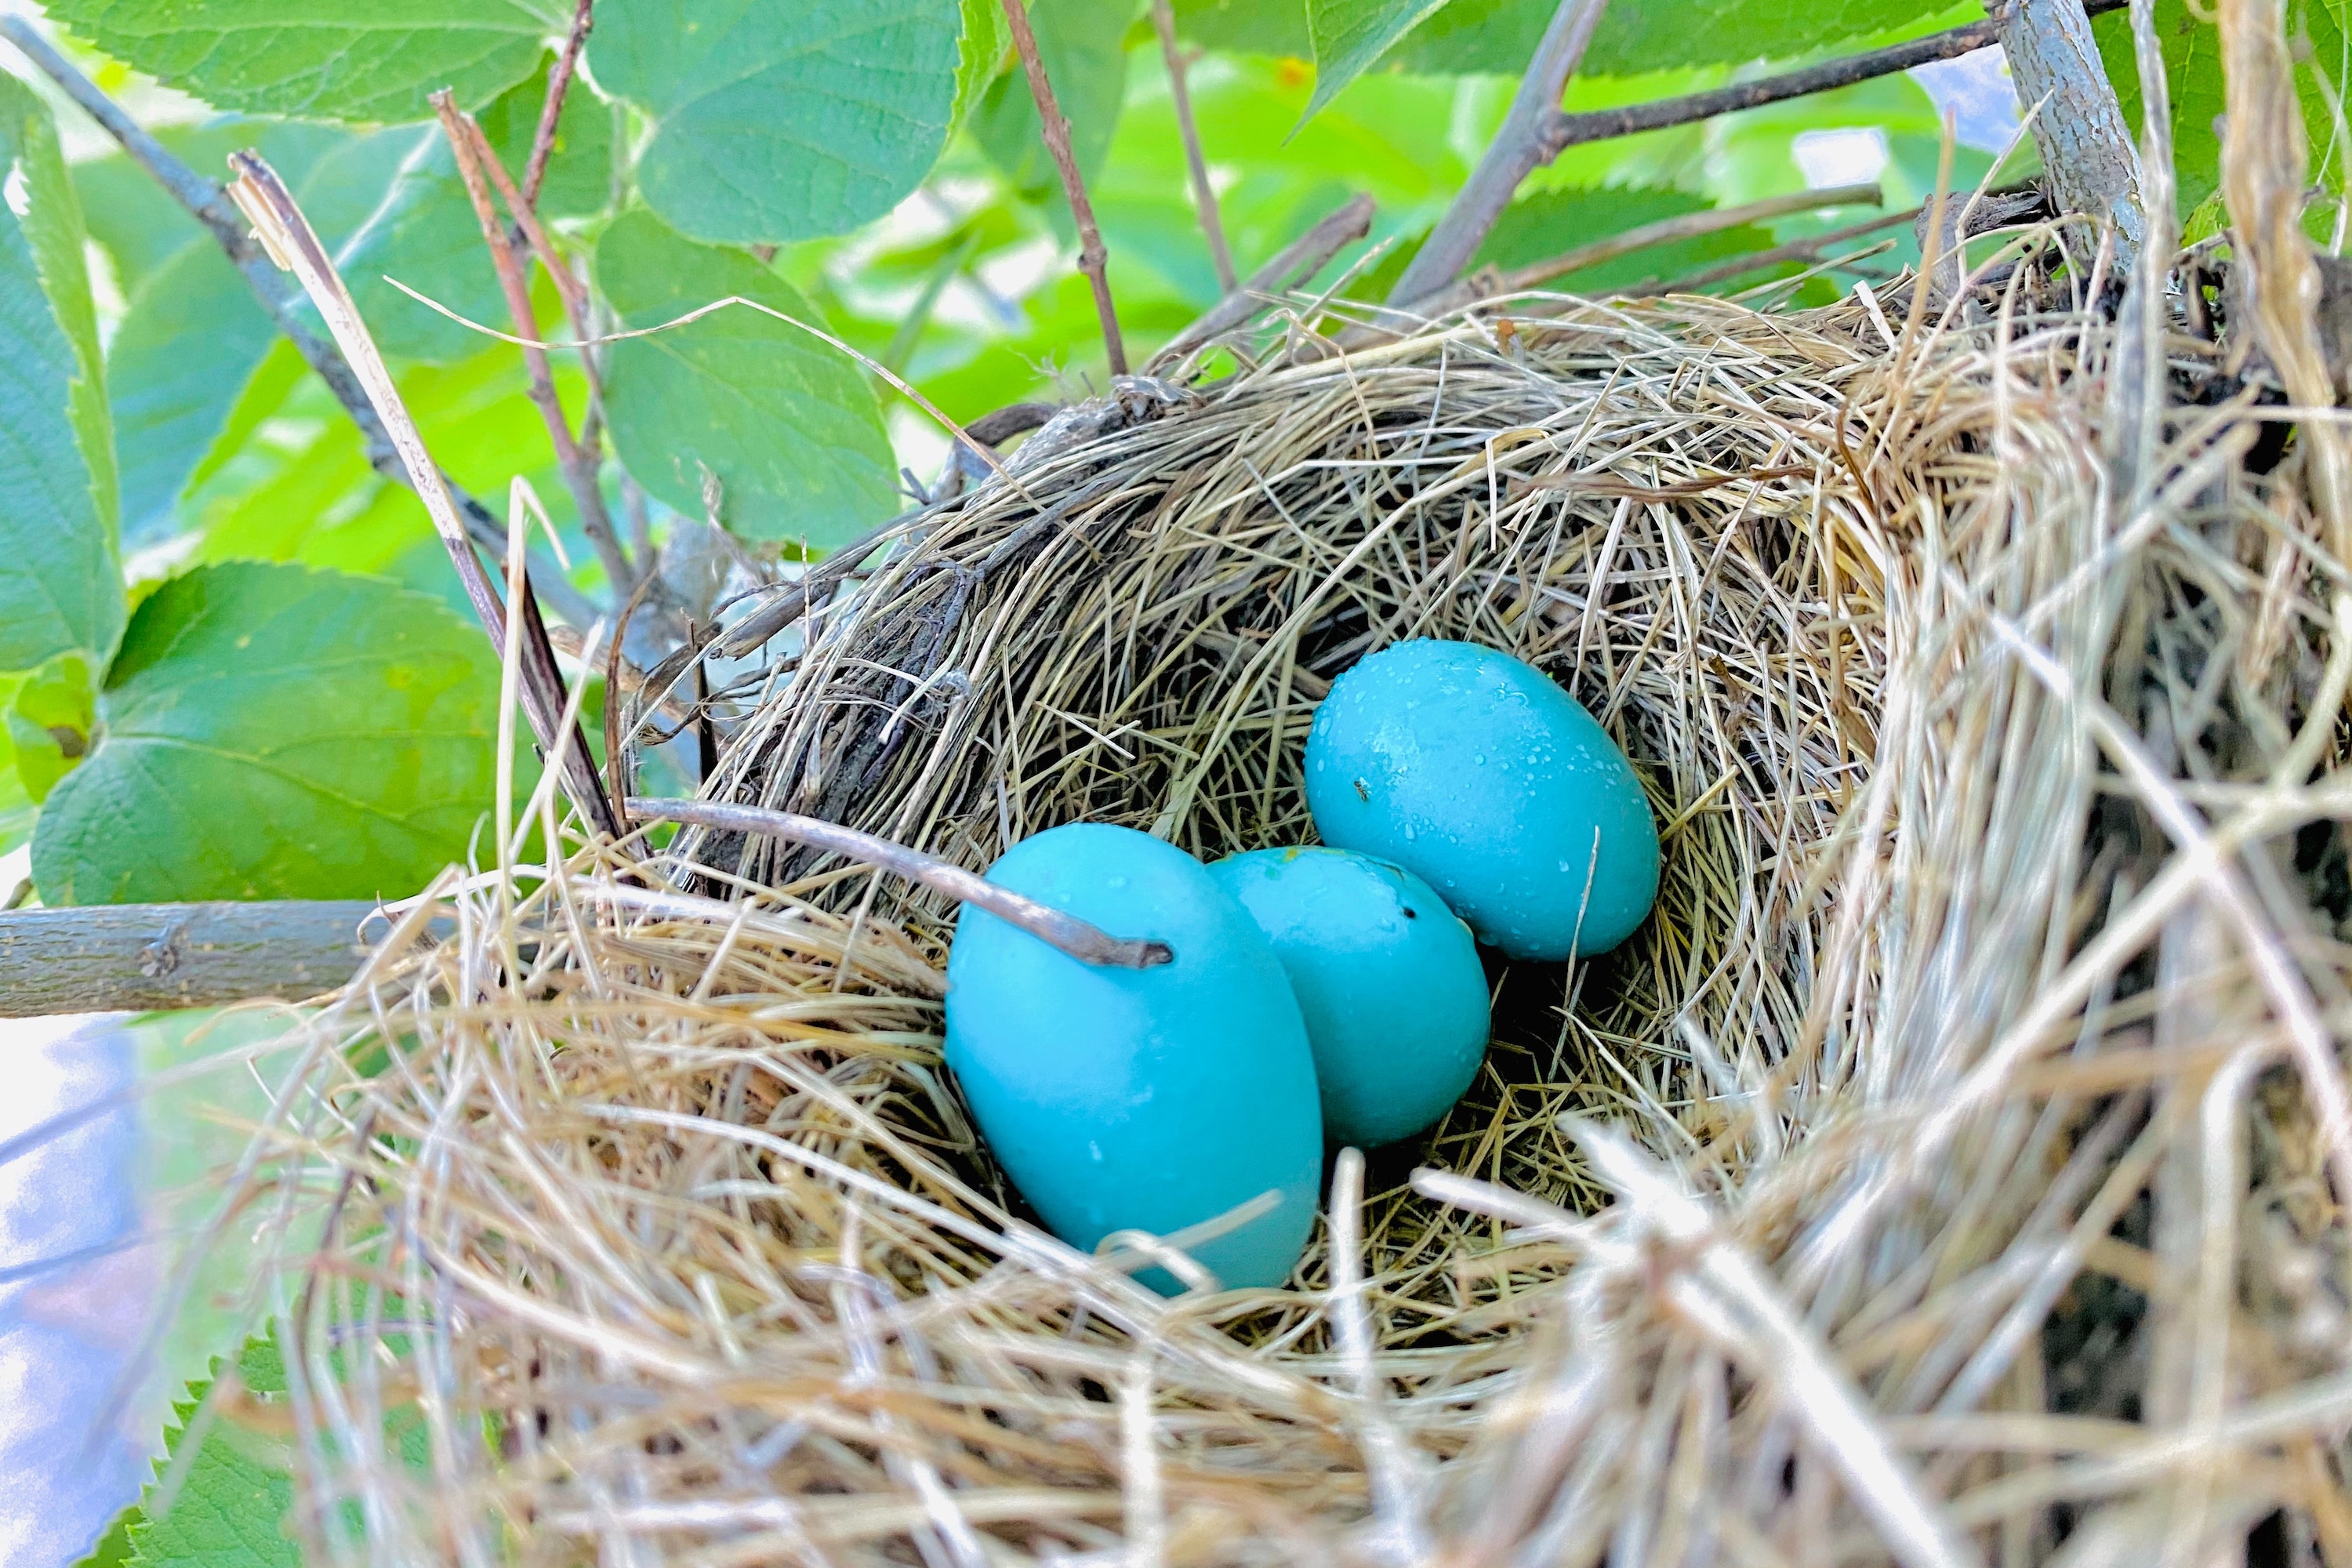 This Is What You Should Do If You Find a Bird Egg | PawTracks